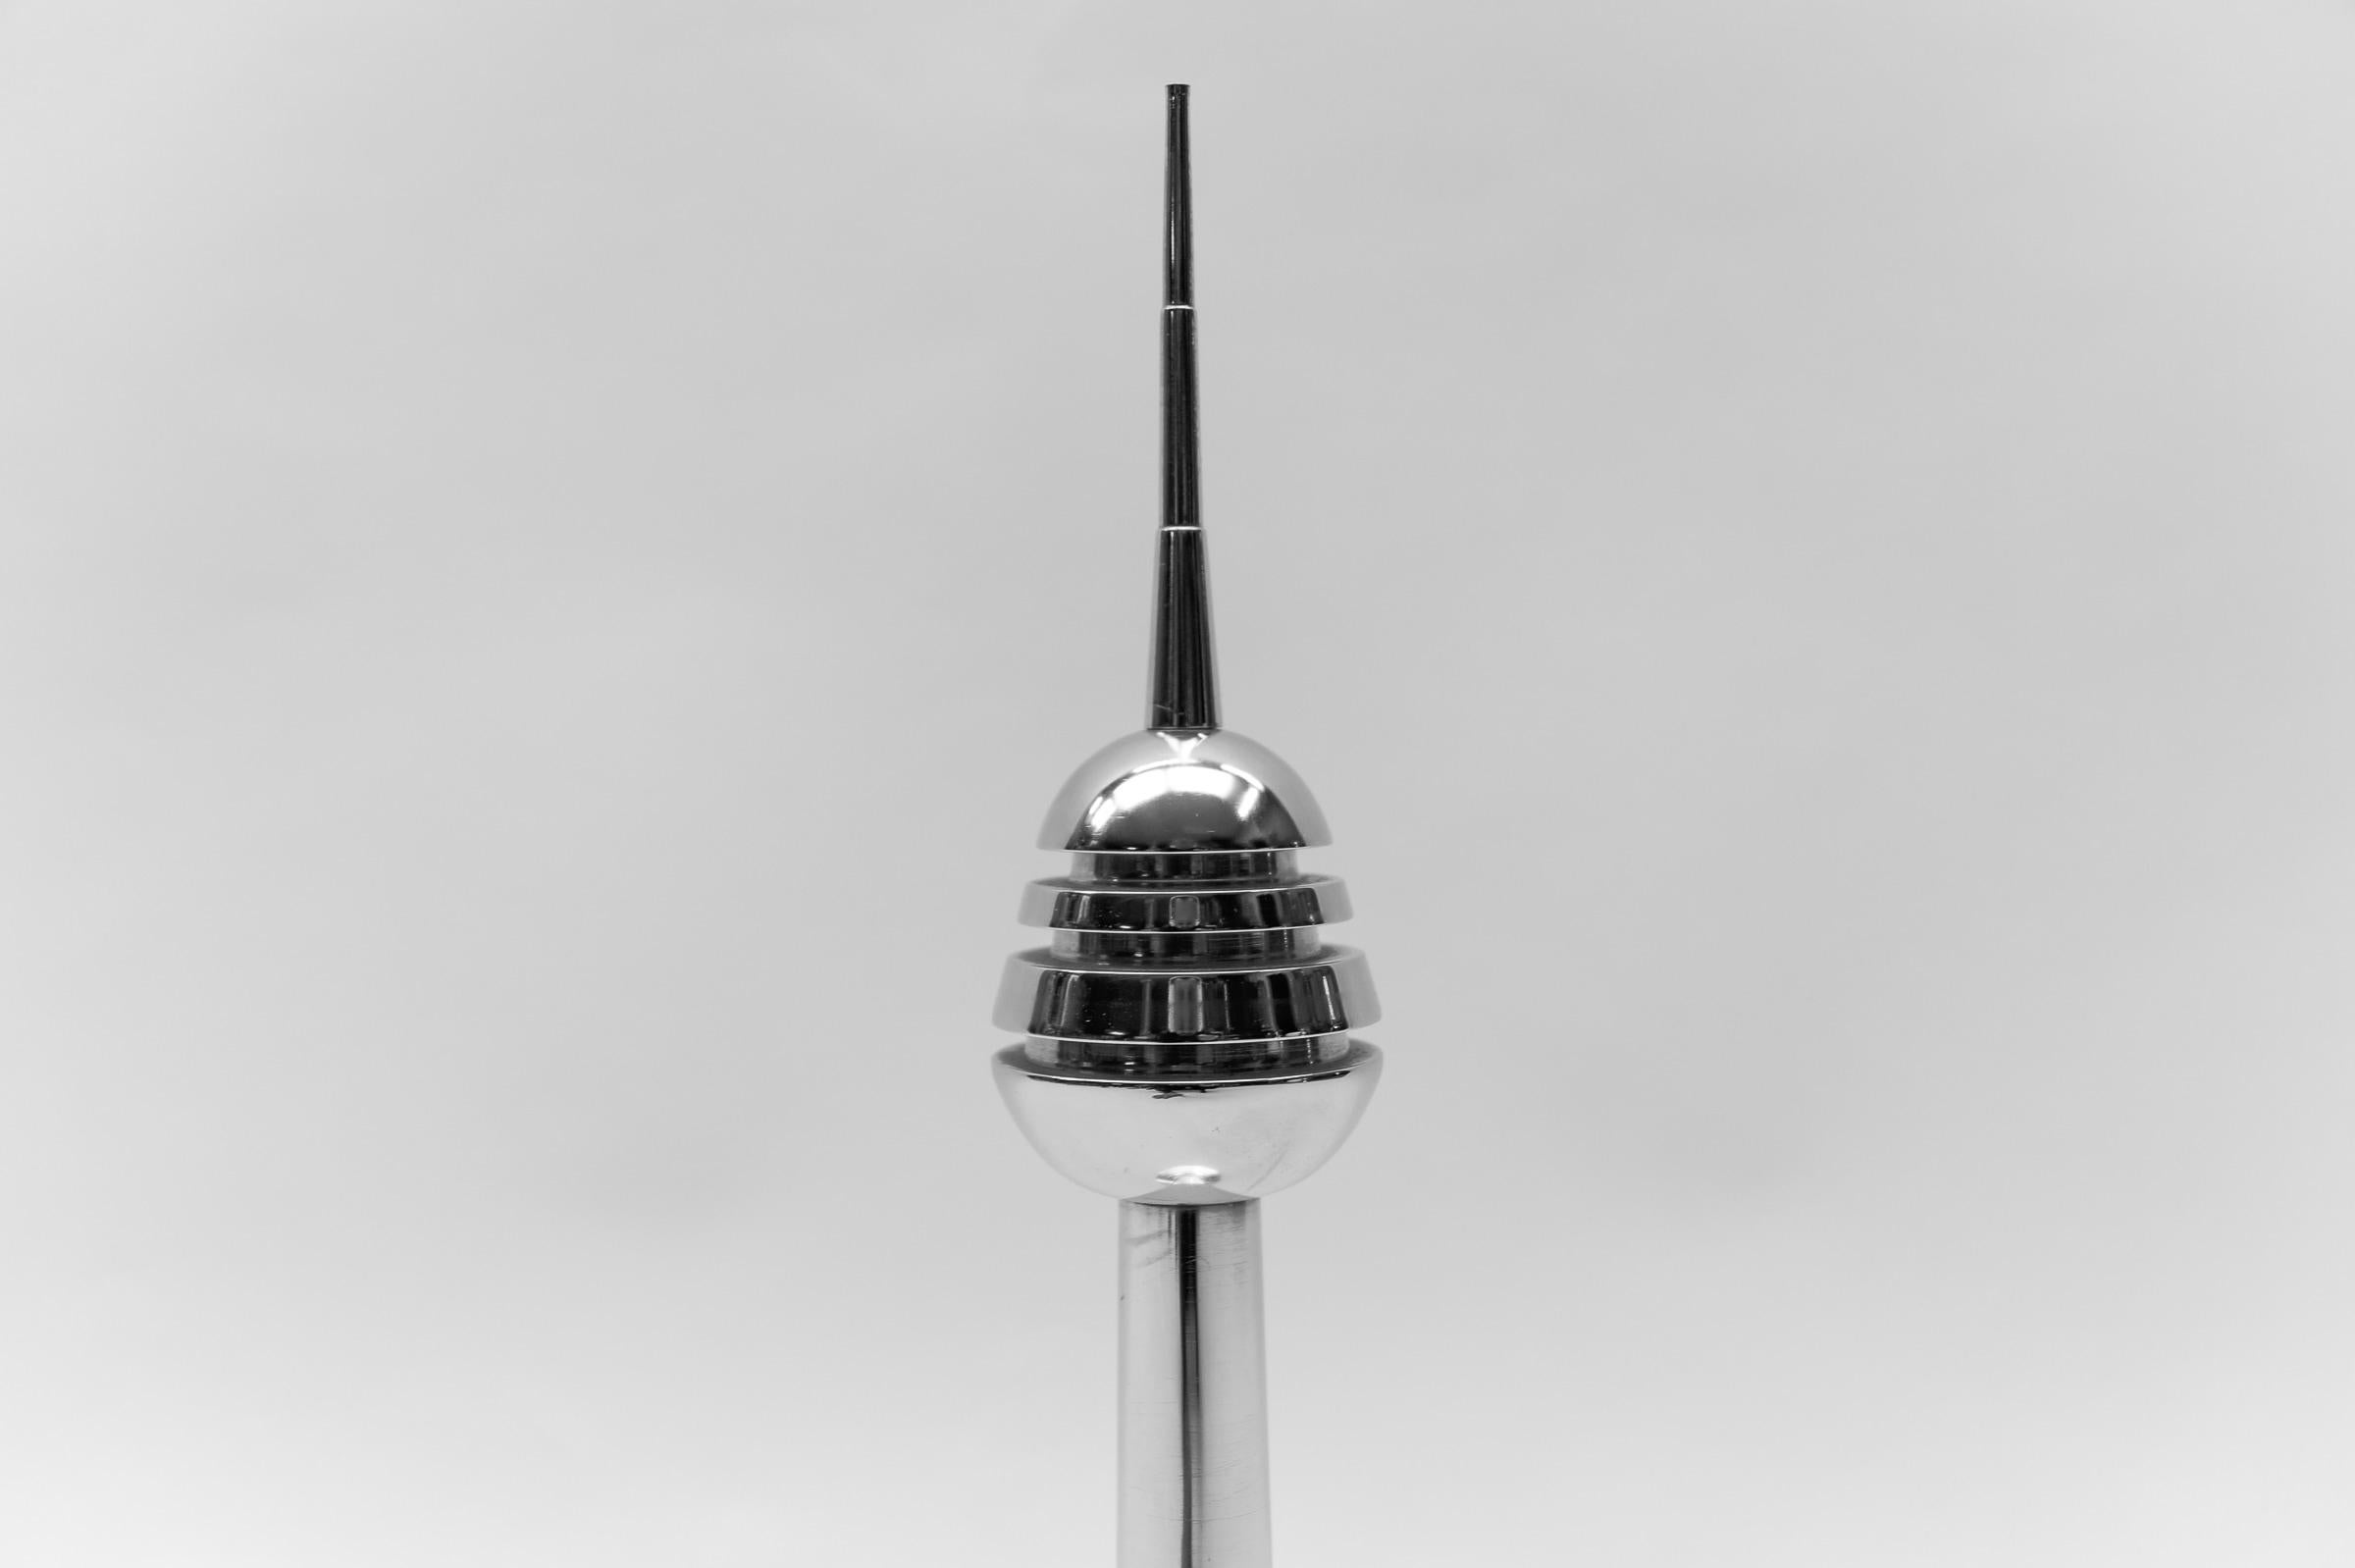 Large and Heavy Mid-Century Modern Tv-Tower Sculpture, 1970s In Good Condition For Sale In Nürnberg, Bayern